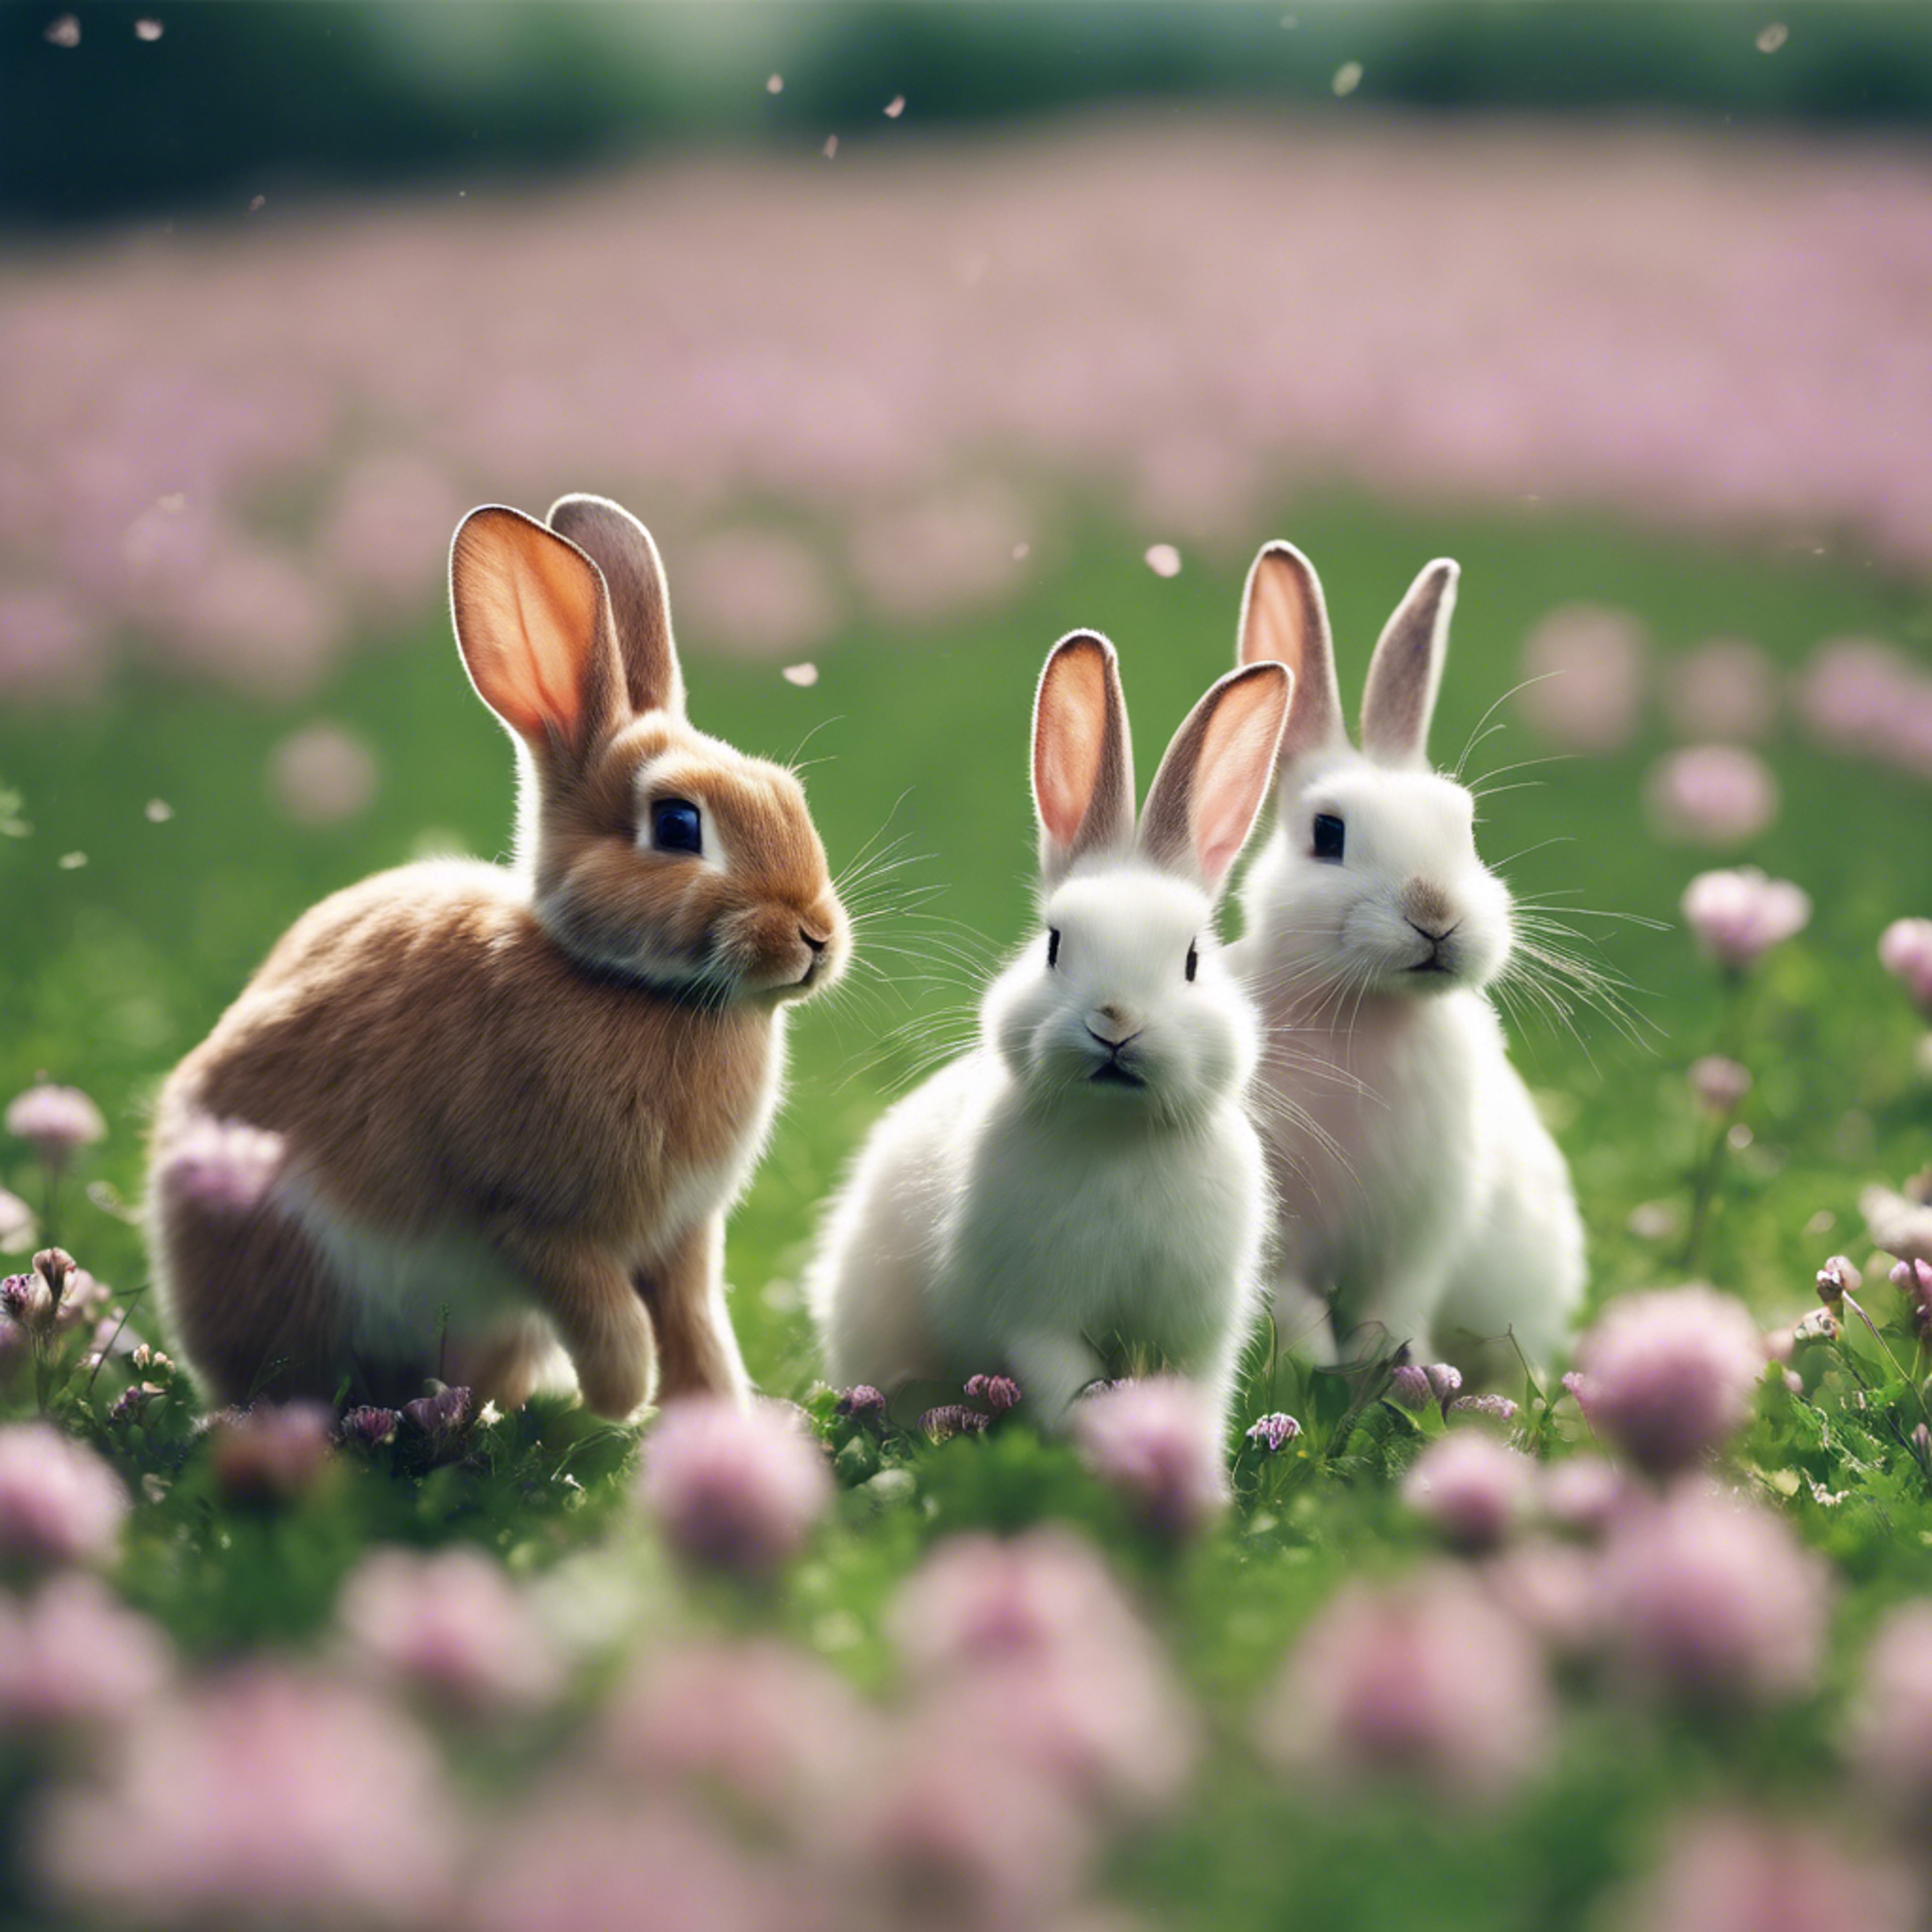 A group of rabbits playing tag in a clover field. Tapeta[610eb32603614430a4af]